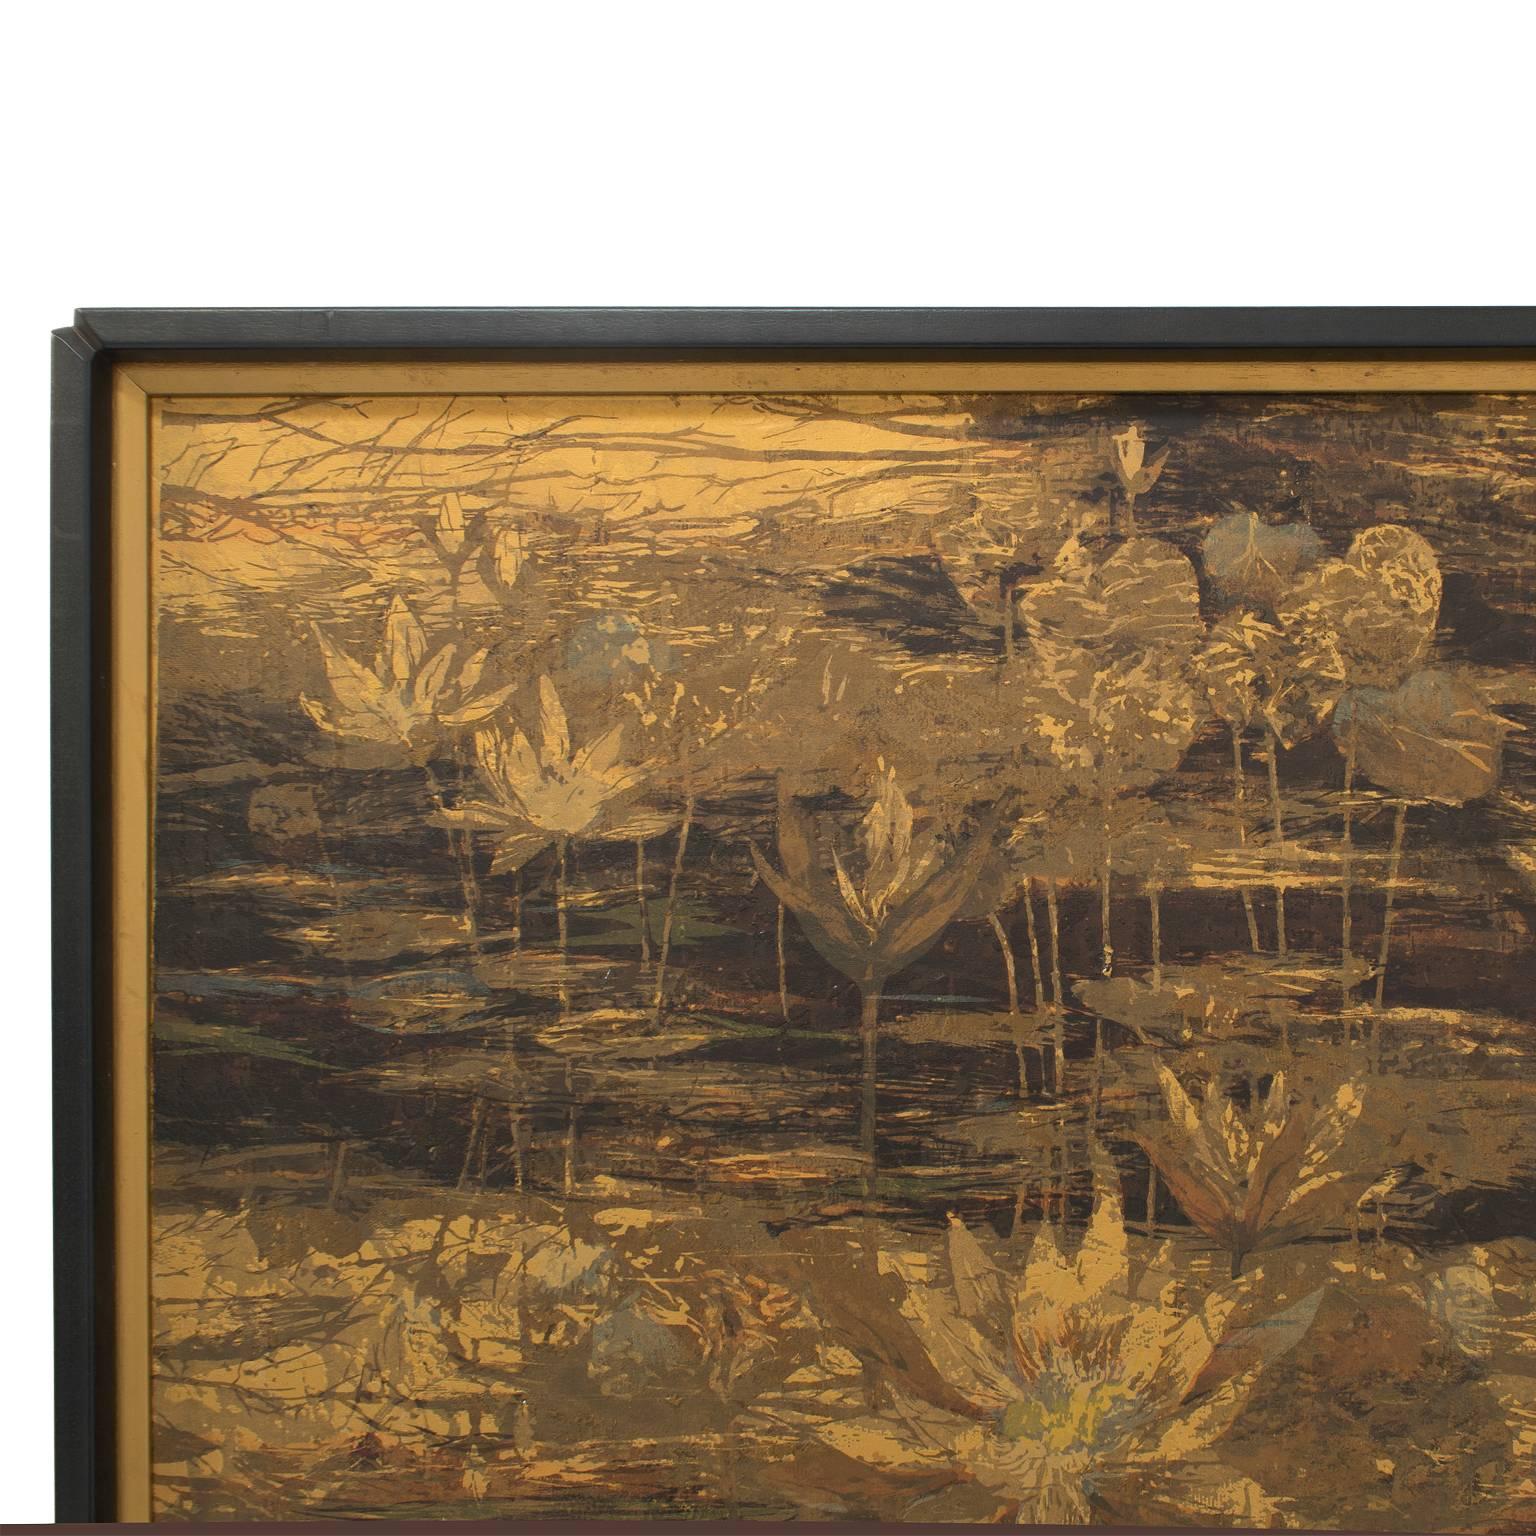 Impressionistic, gallery framed and very large original serigraph on board. Layers of opaque colors in metallic gold on a background of muted neutrals, each laid with its own screen, create a beautifully textured artwork. Including the frame, this